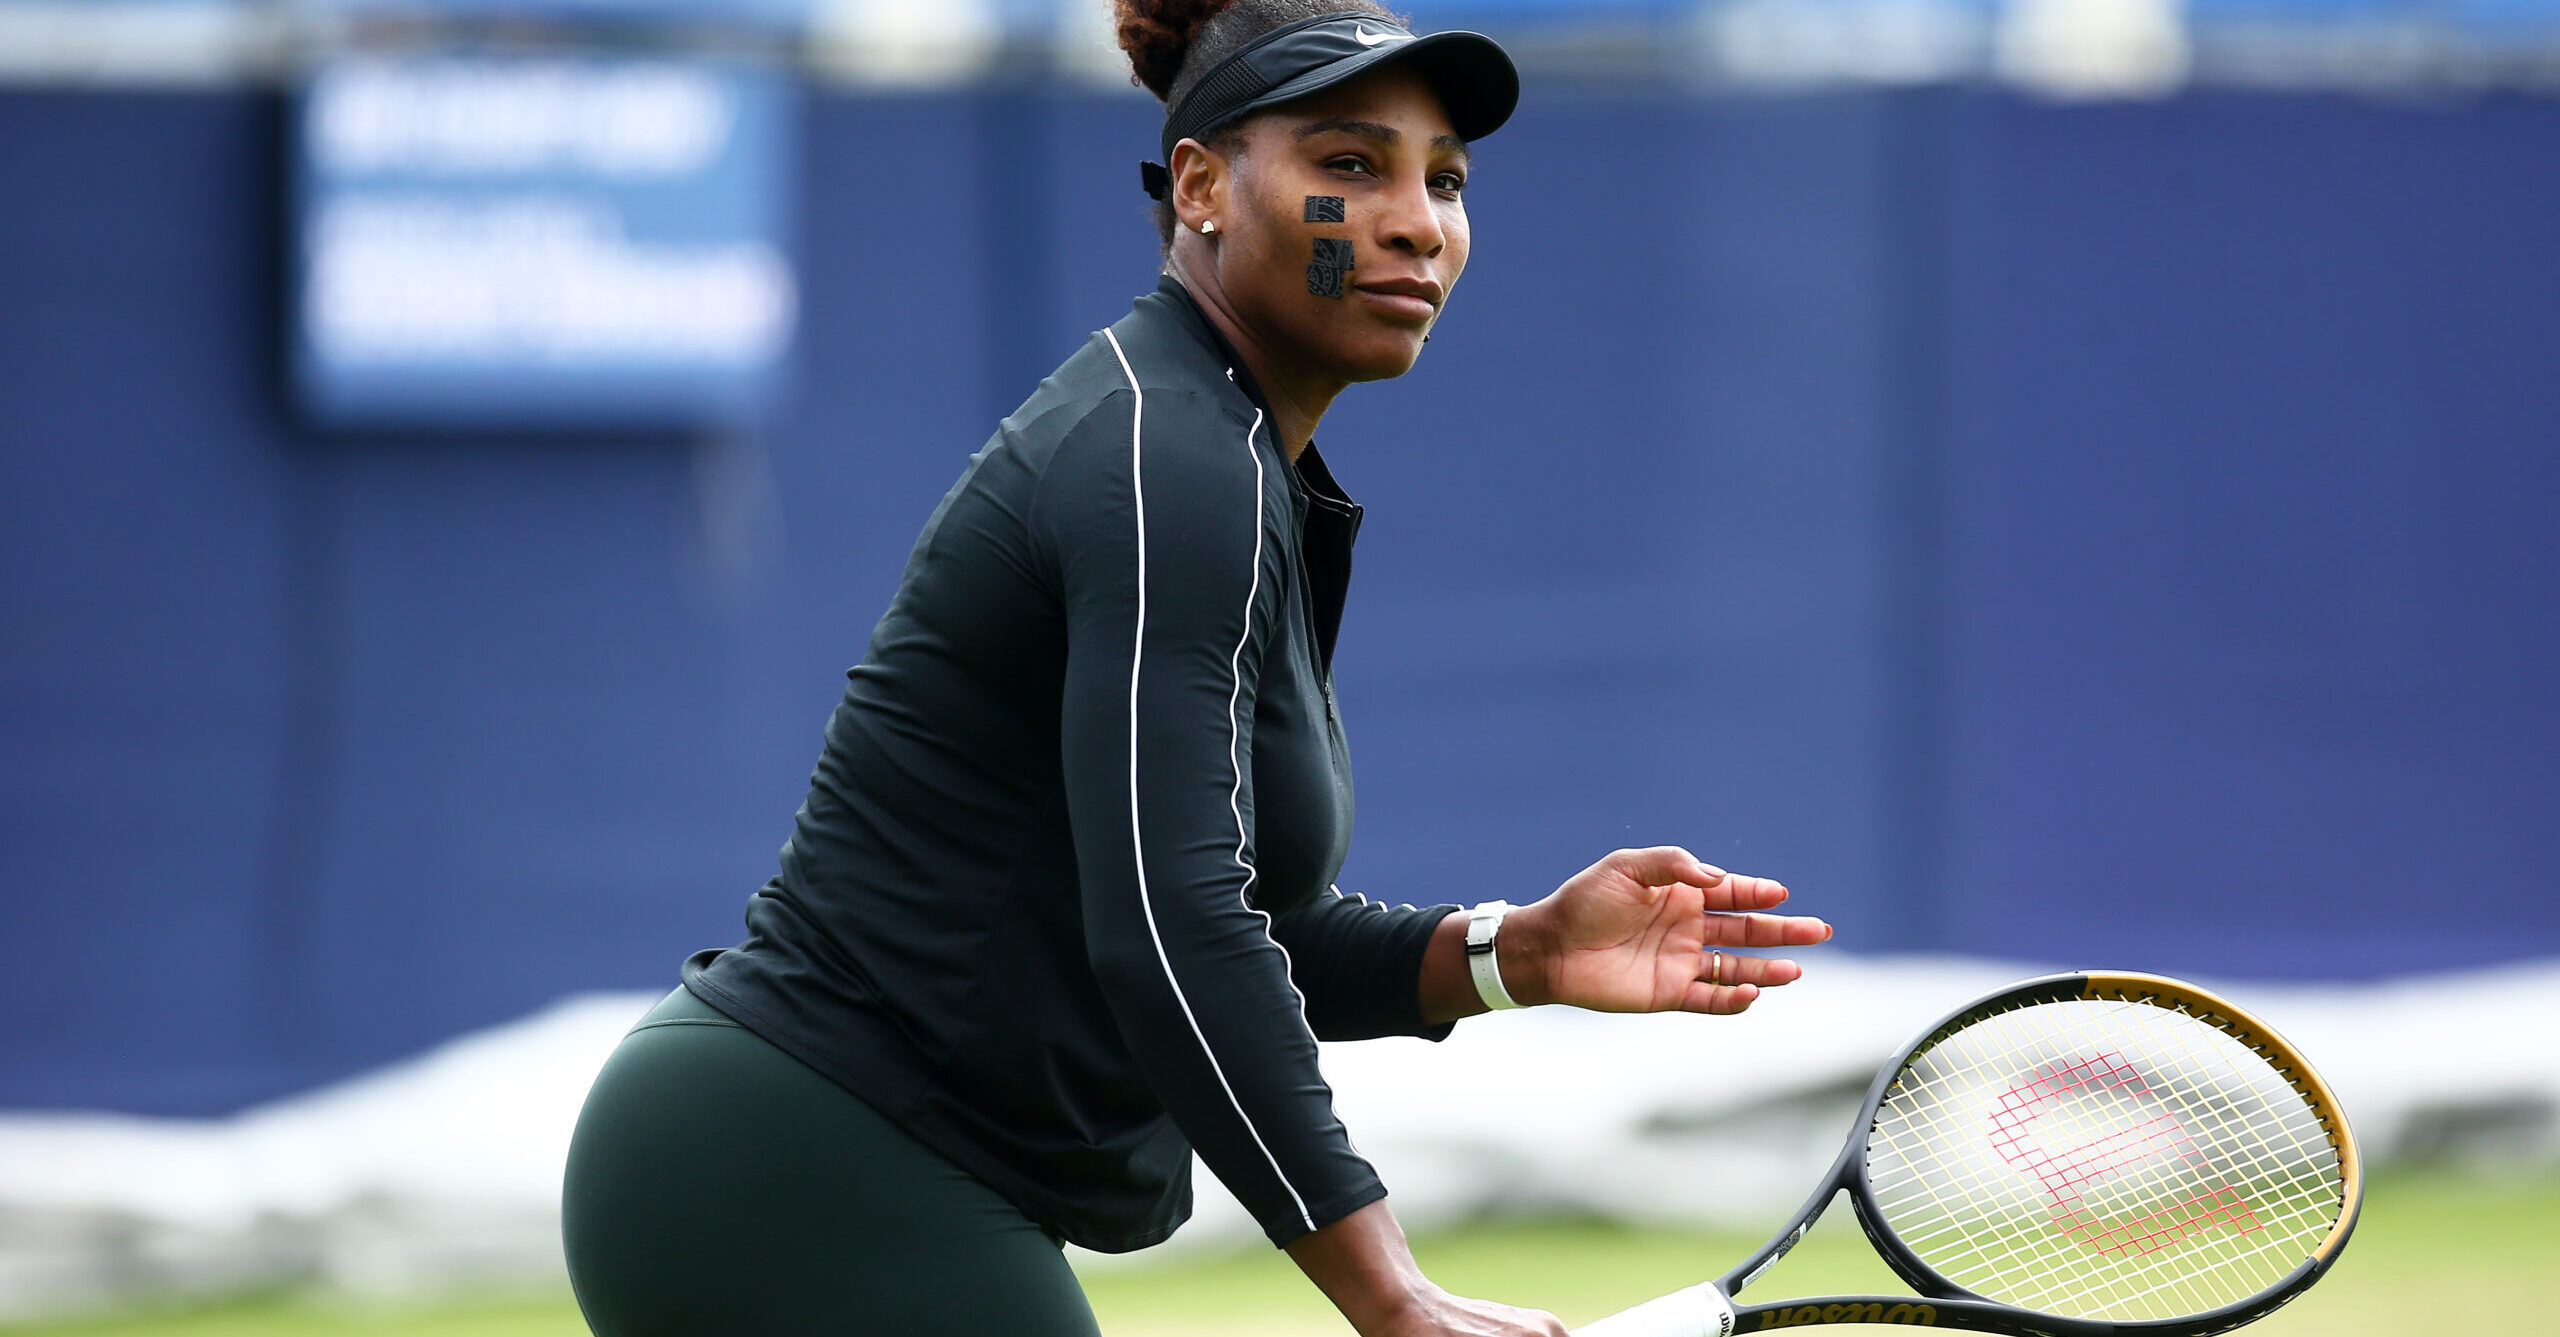 Serena Williams Returns To The Tennis Court After Year-Long Hiatus